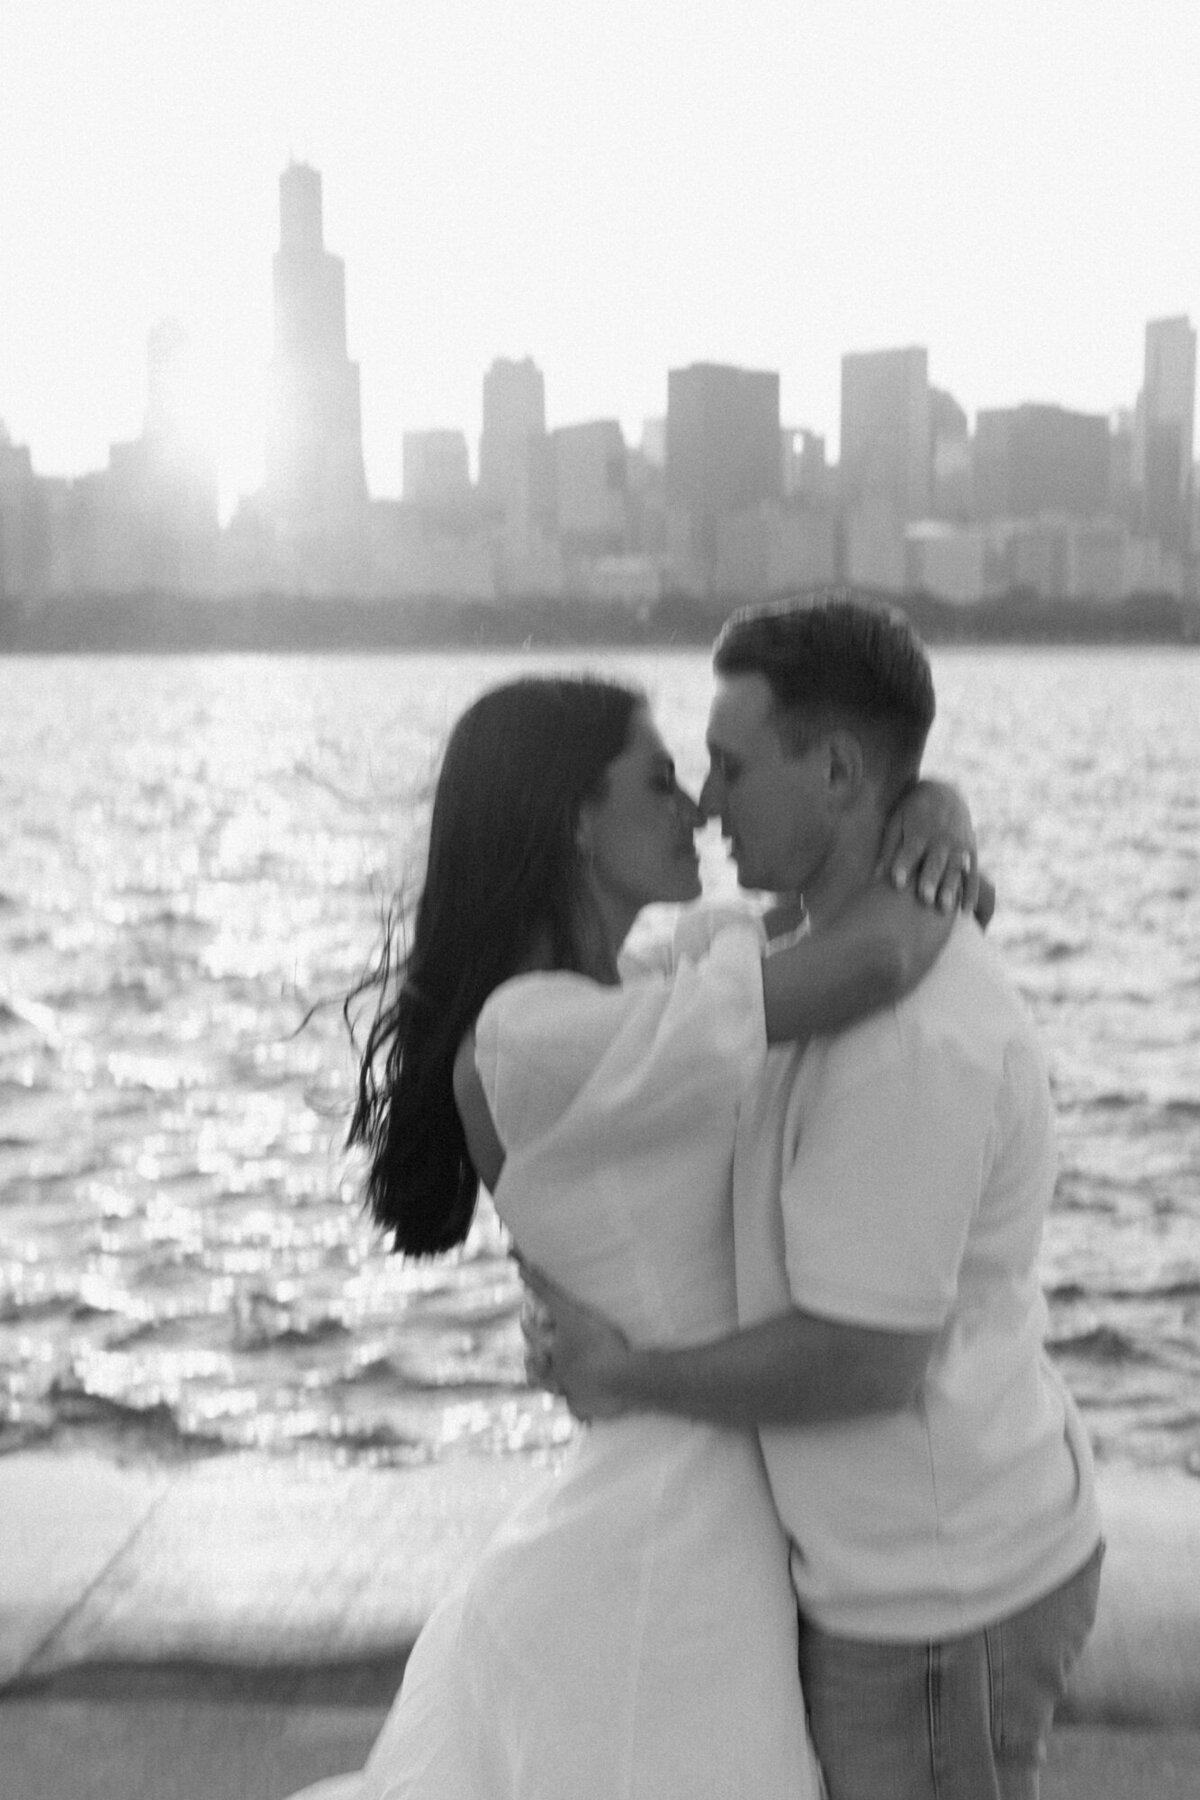 A slightly out of focus black and white engagement photo taken in front of Chicago's skyline